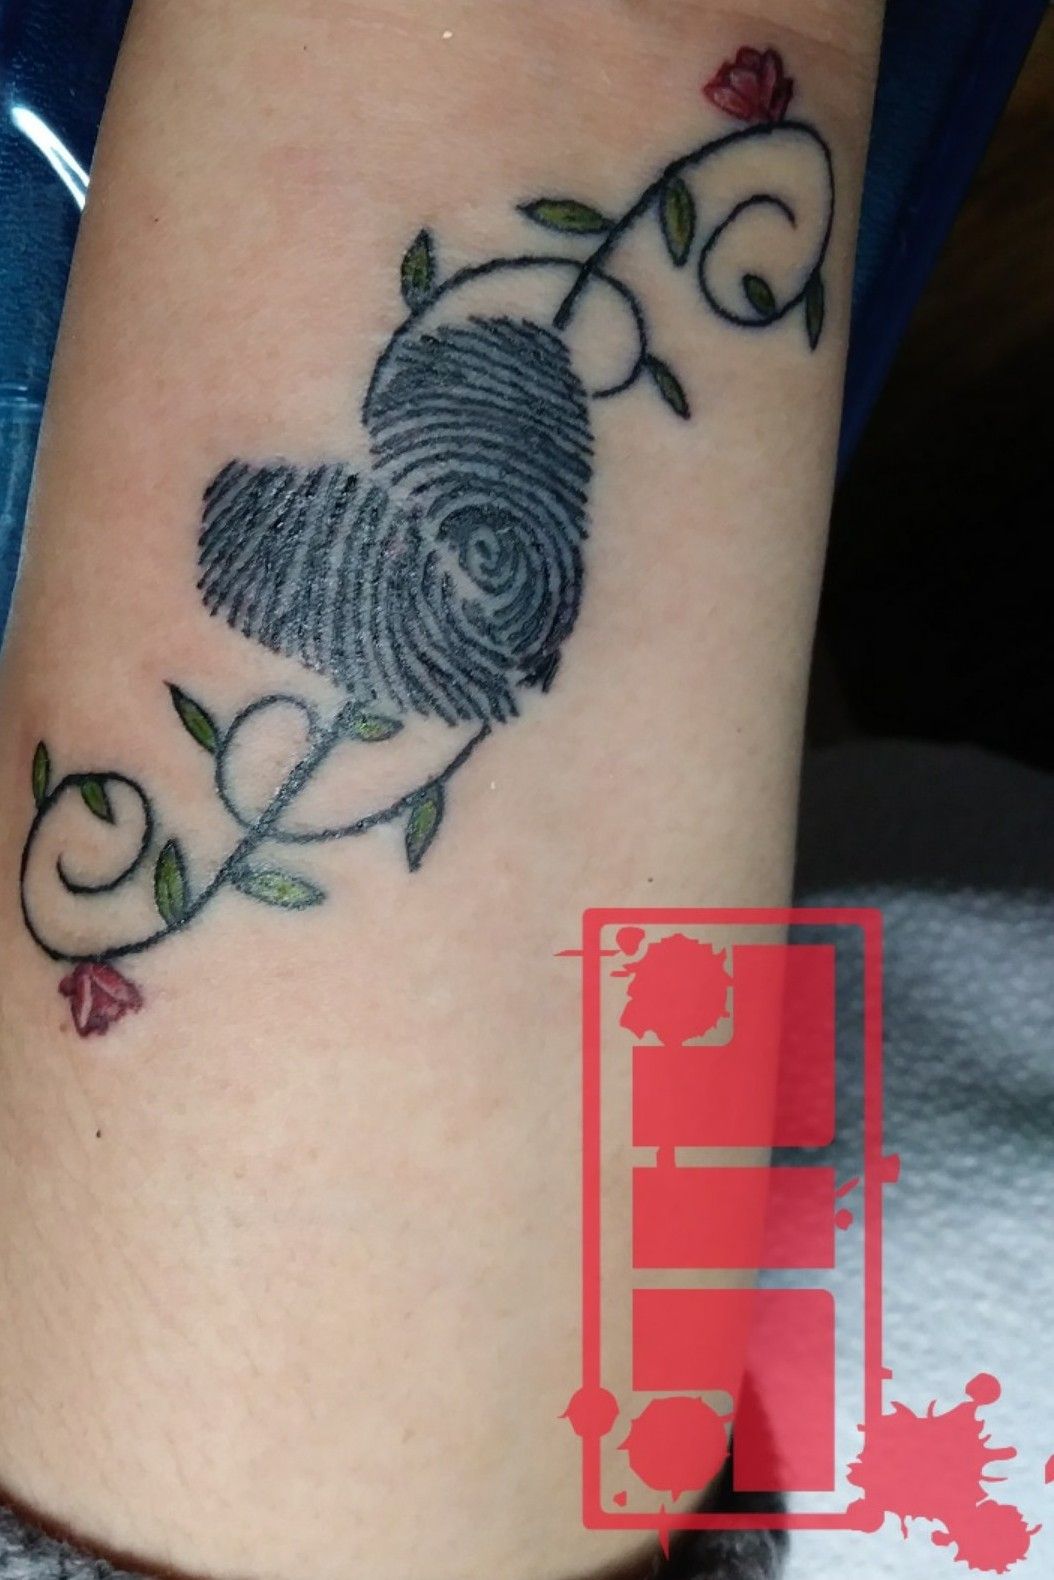 My new tat  All my siblings fingerprints for the petals with my parents  as the leaves3 tattoo fam  Fingerabdruck tattoos Geschwister tattoo  Tochter tattoos